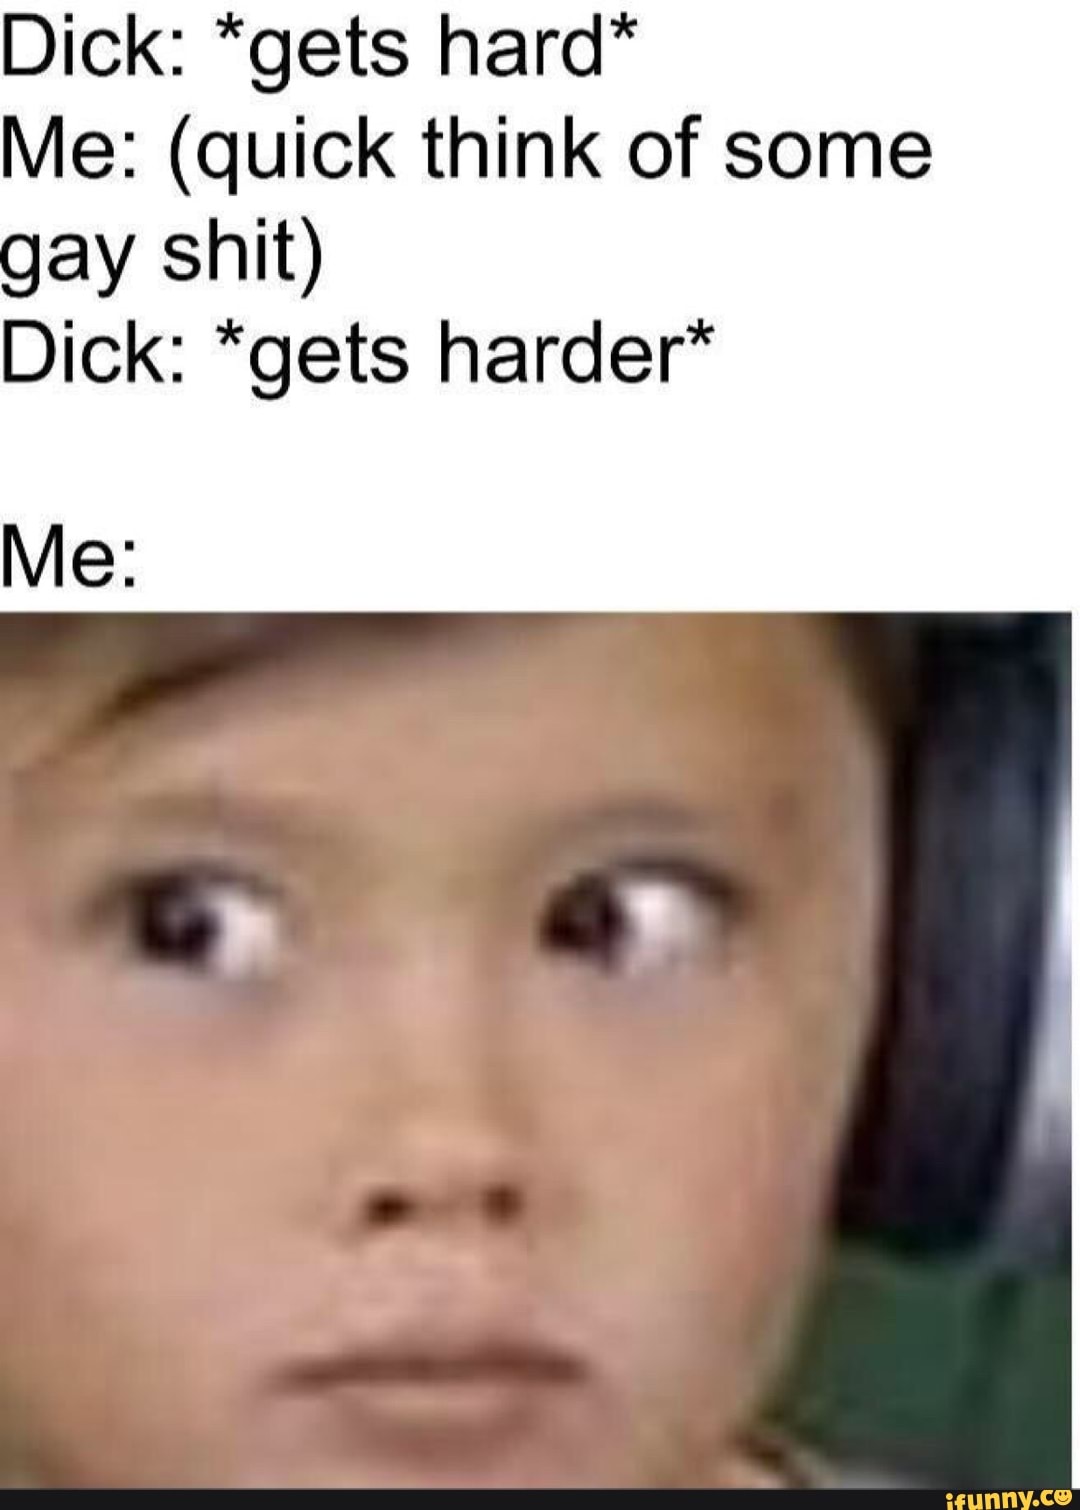 My dick is on hard